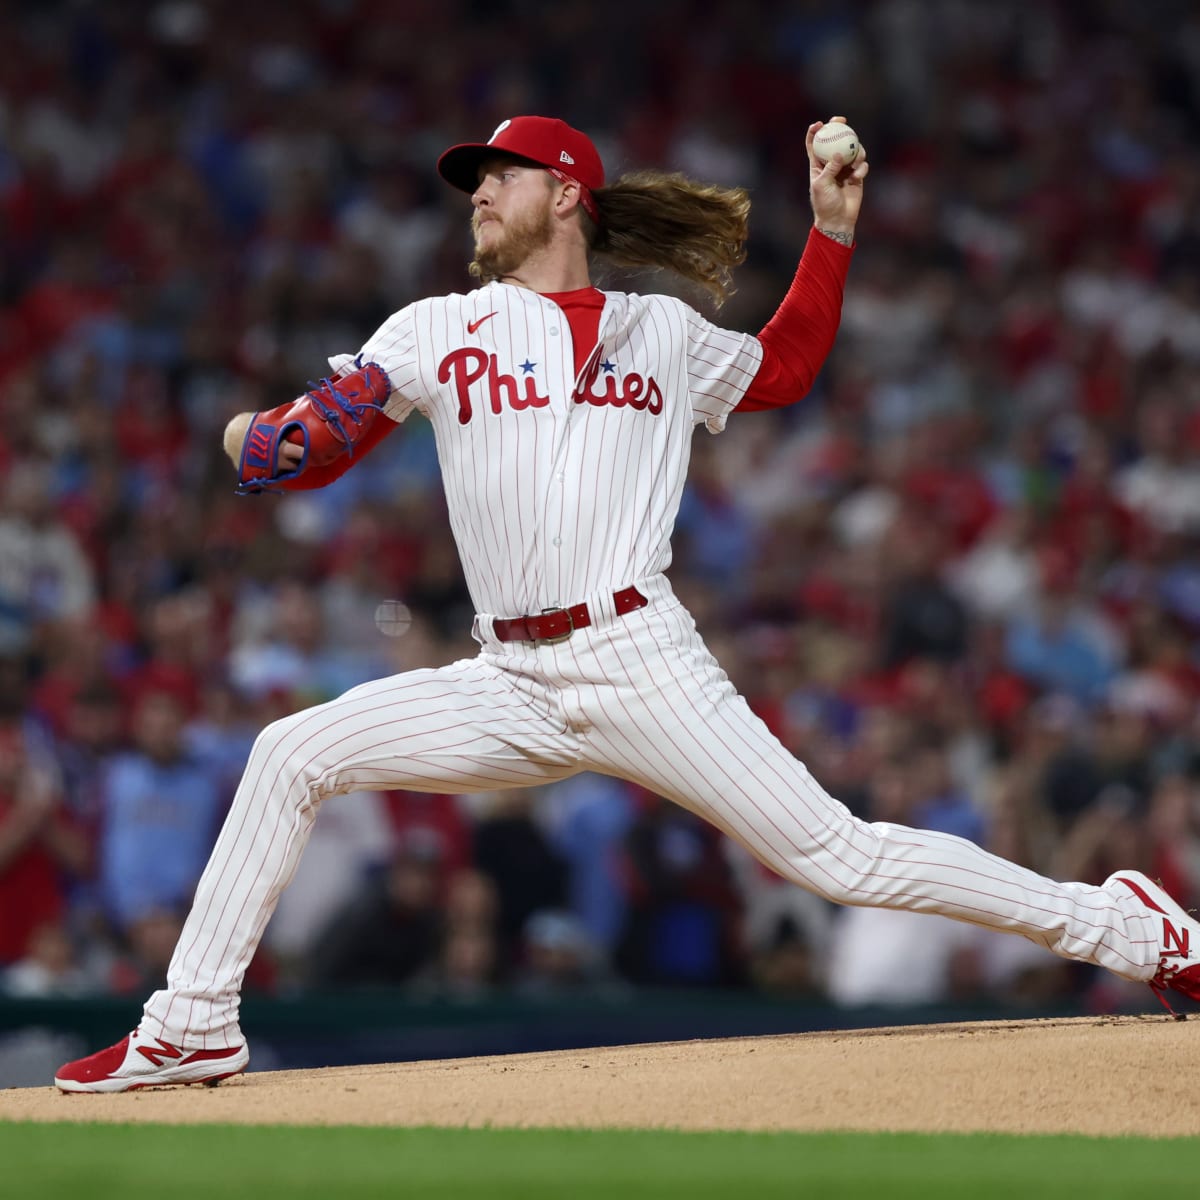 Should Bailey Falter be considered for a playoff start? – Philly